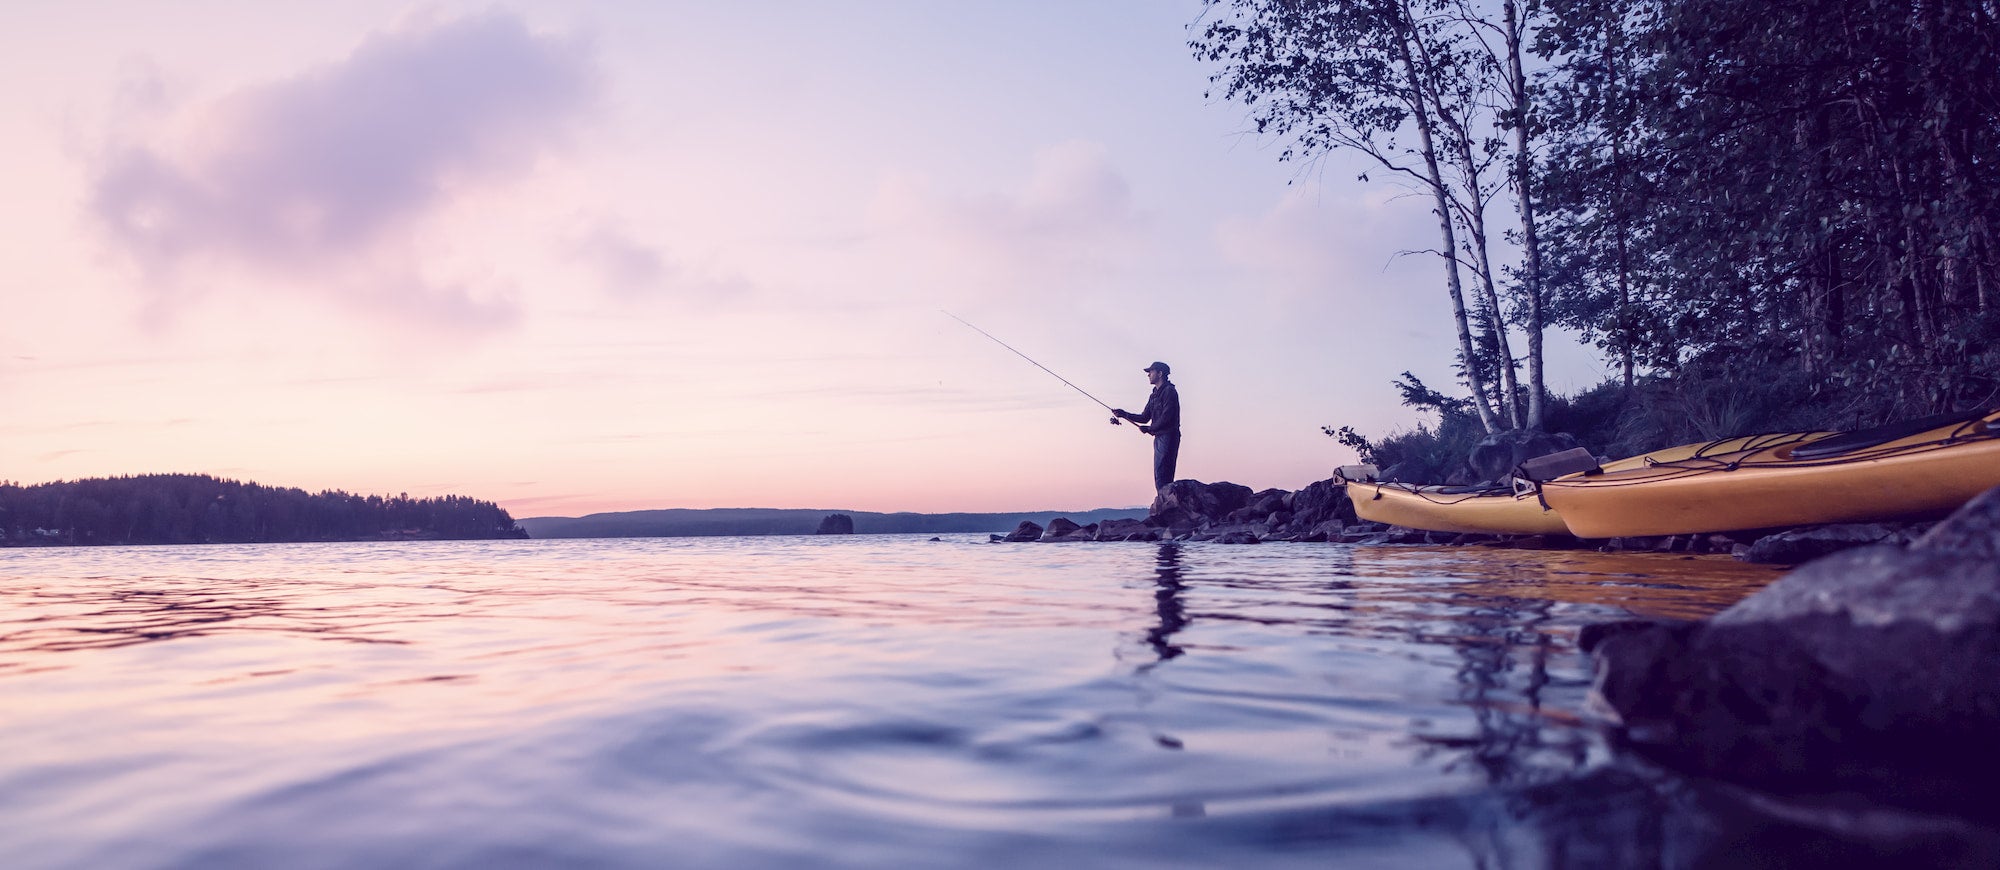 Where to go fishing near me? Discover the Best Fishing Spots